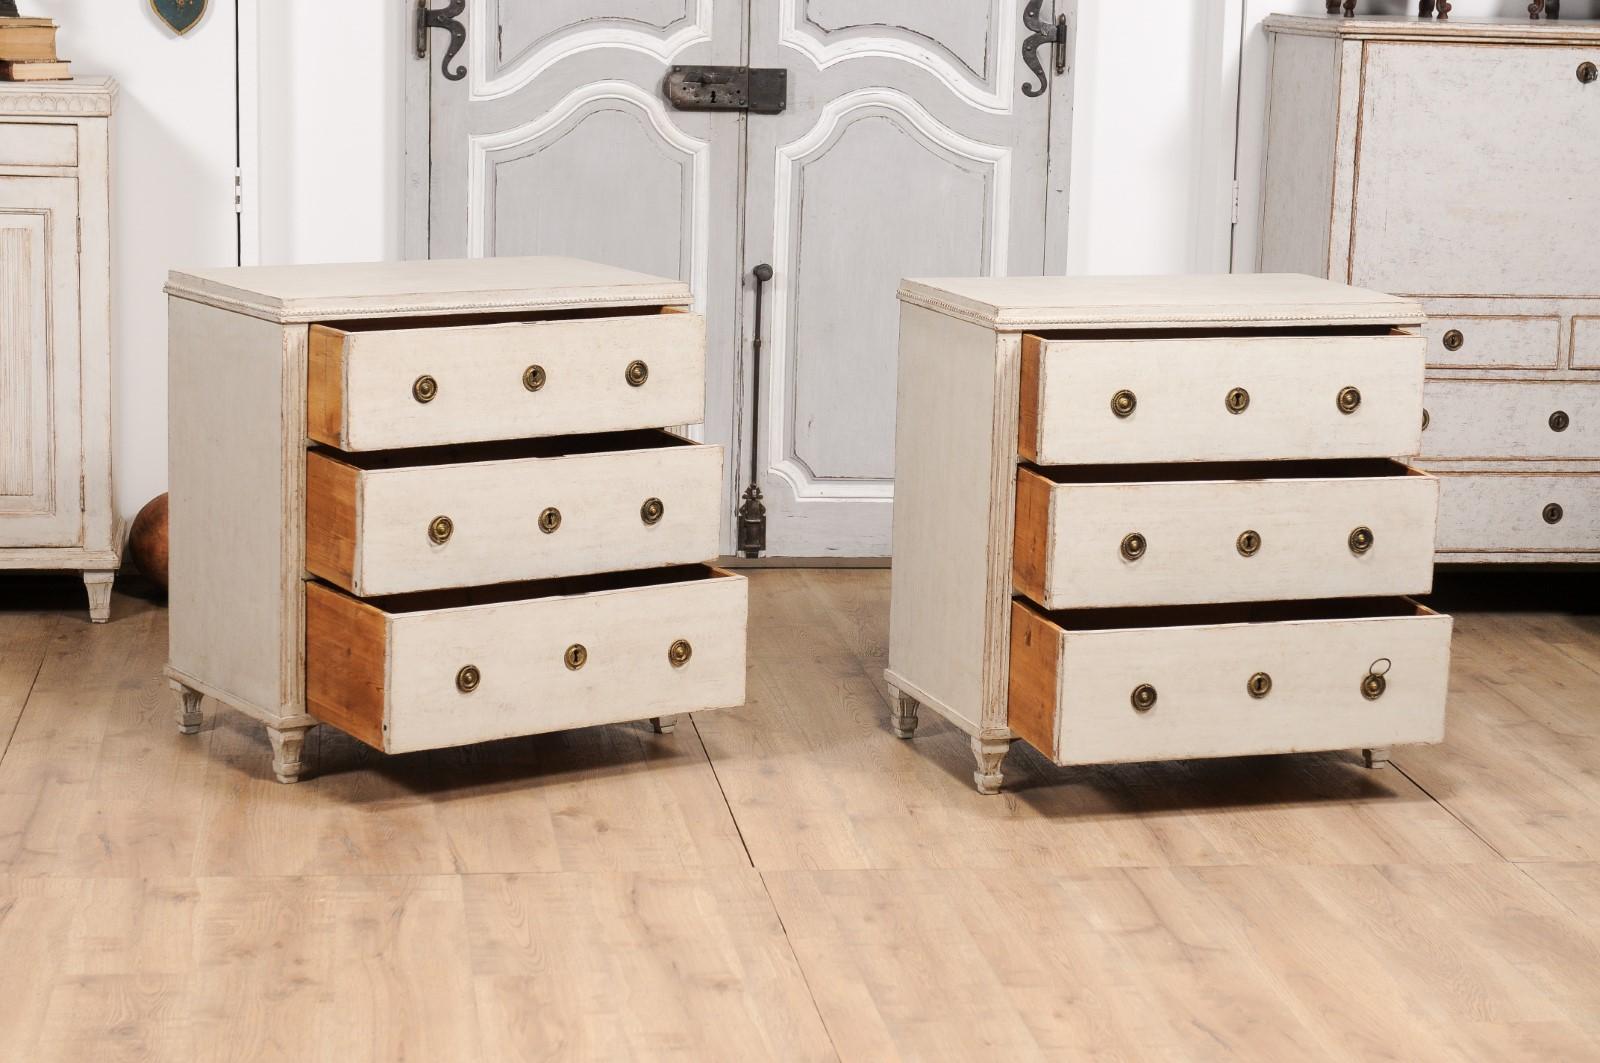 19th Century Swedish Gustavian Style 1880s Gray Beige Painted Three-Drawer Chests, a Pair